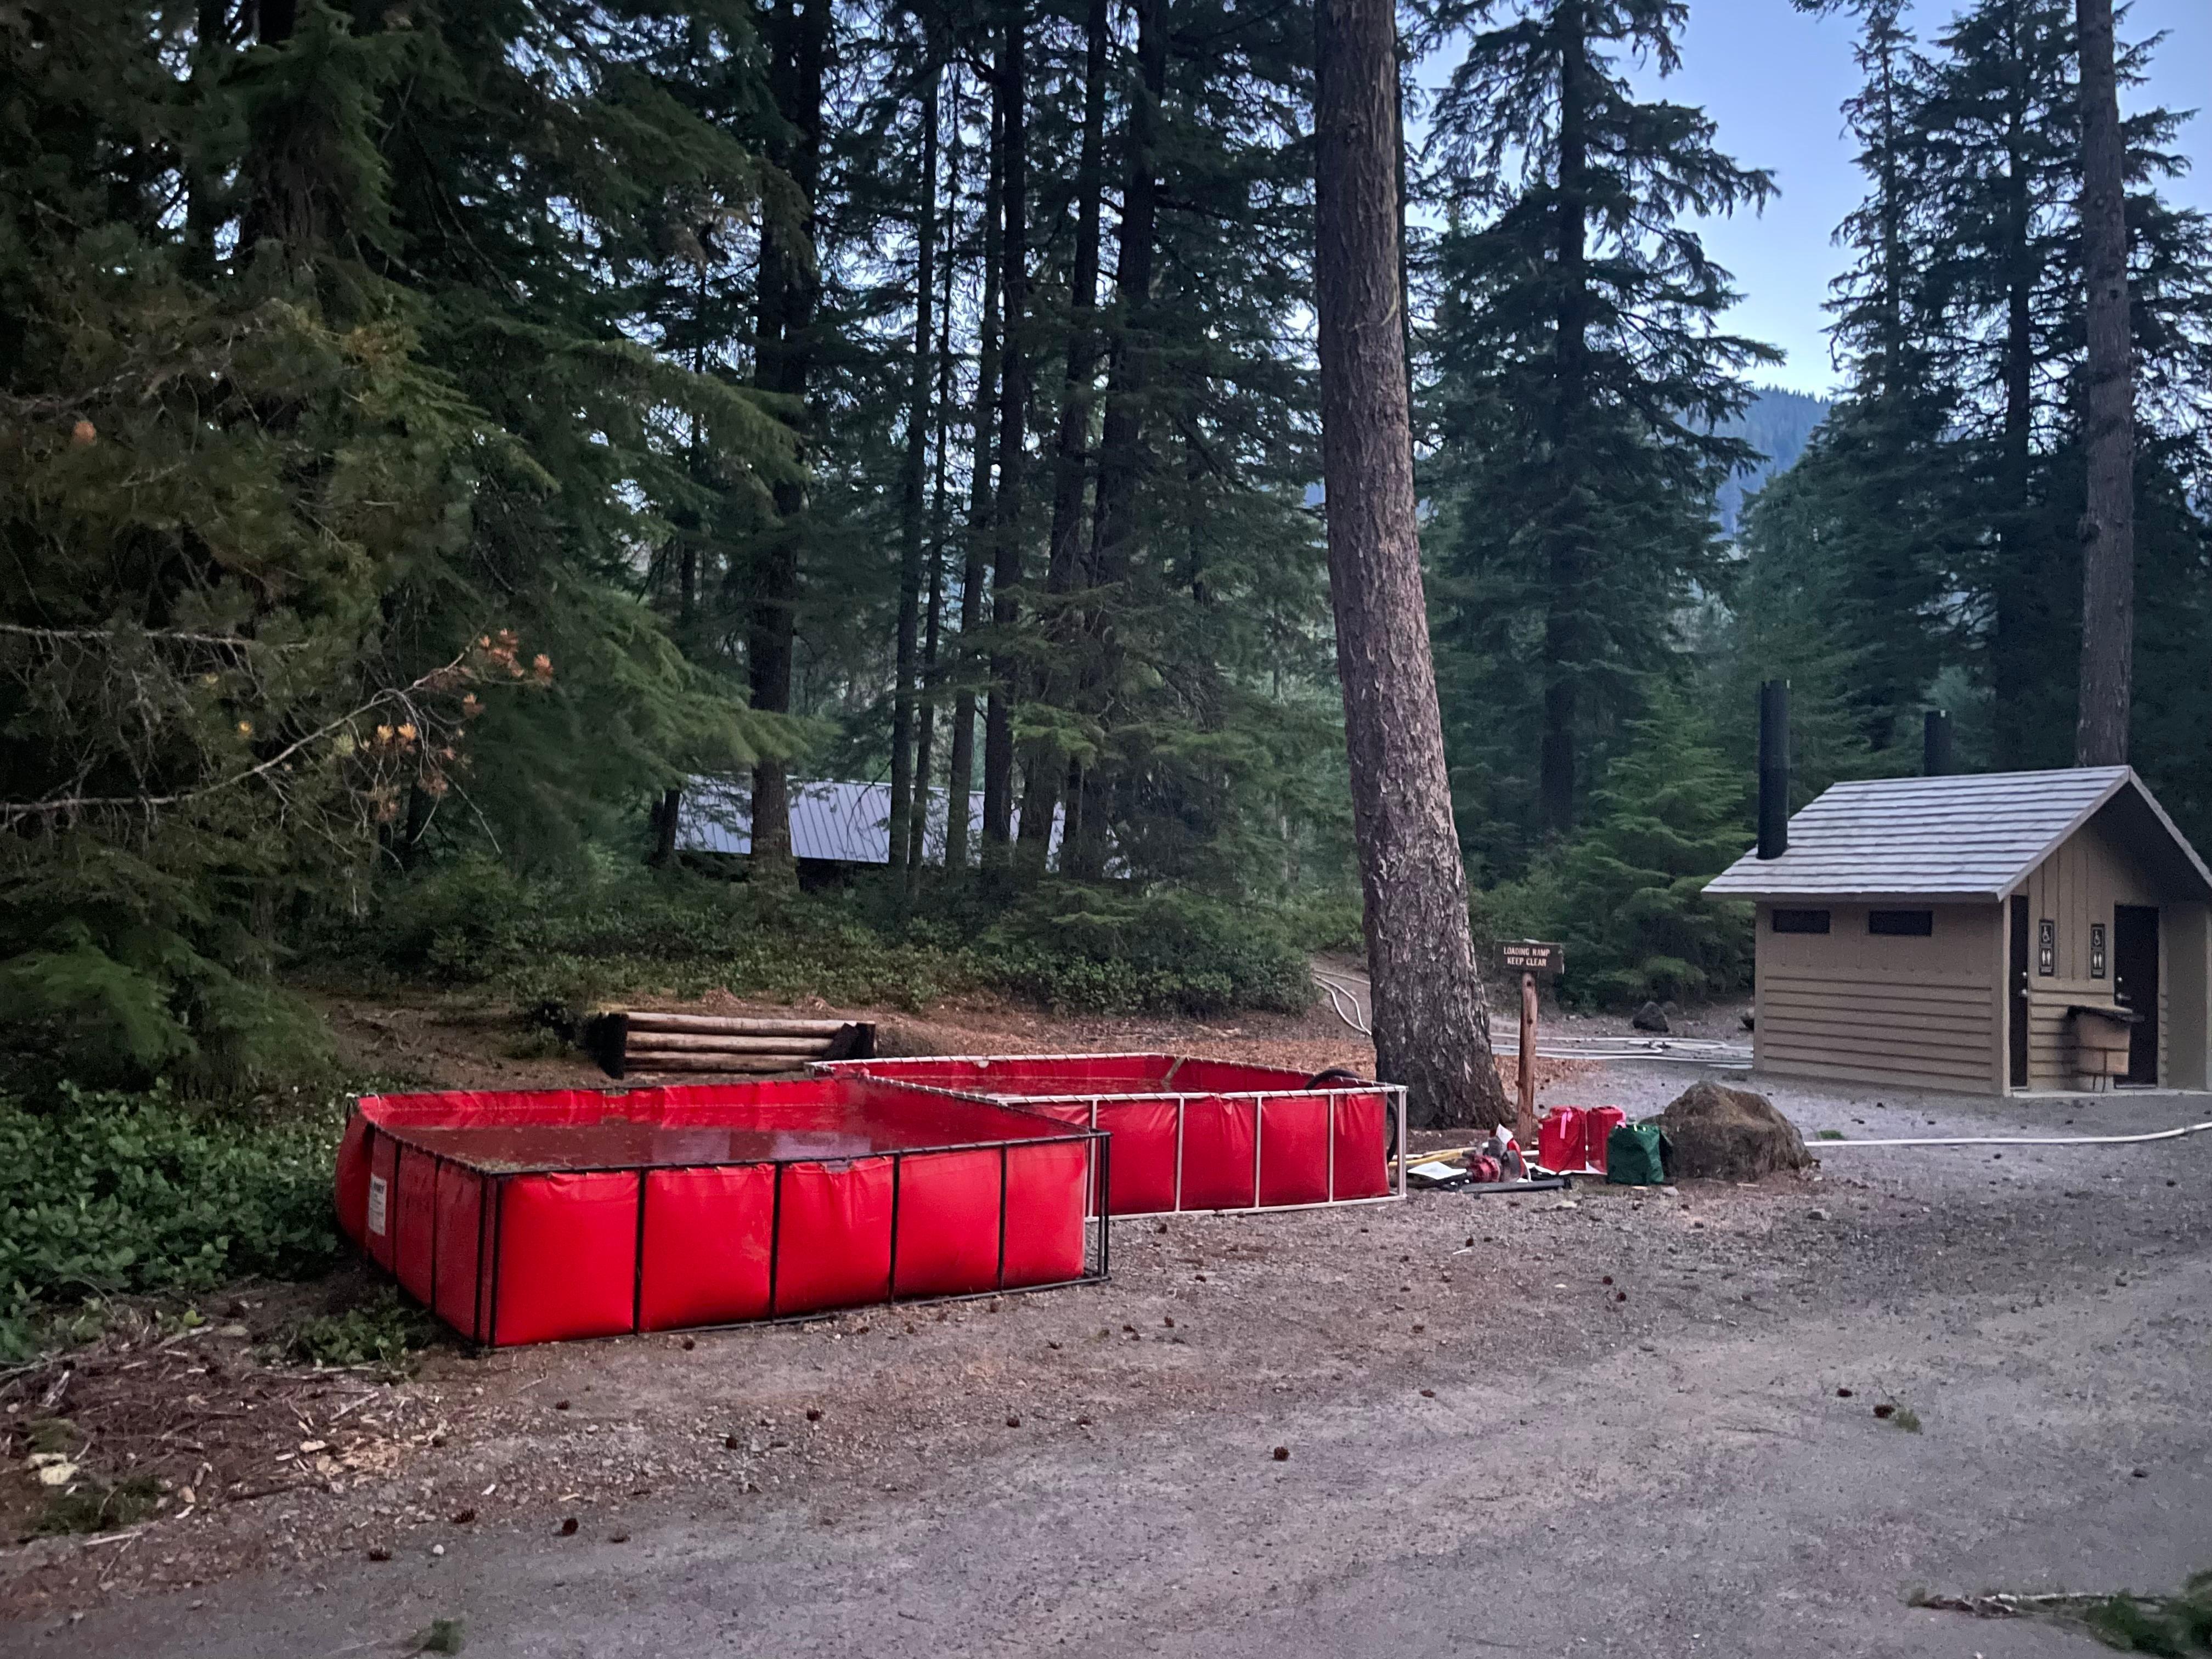 These red 3000 gallons tanks are ready for firefighters to pull water from to defend the structure at Kalama Horse Camp. The crew fills them up with tankers and leave in place until needed.